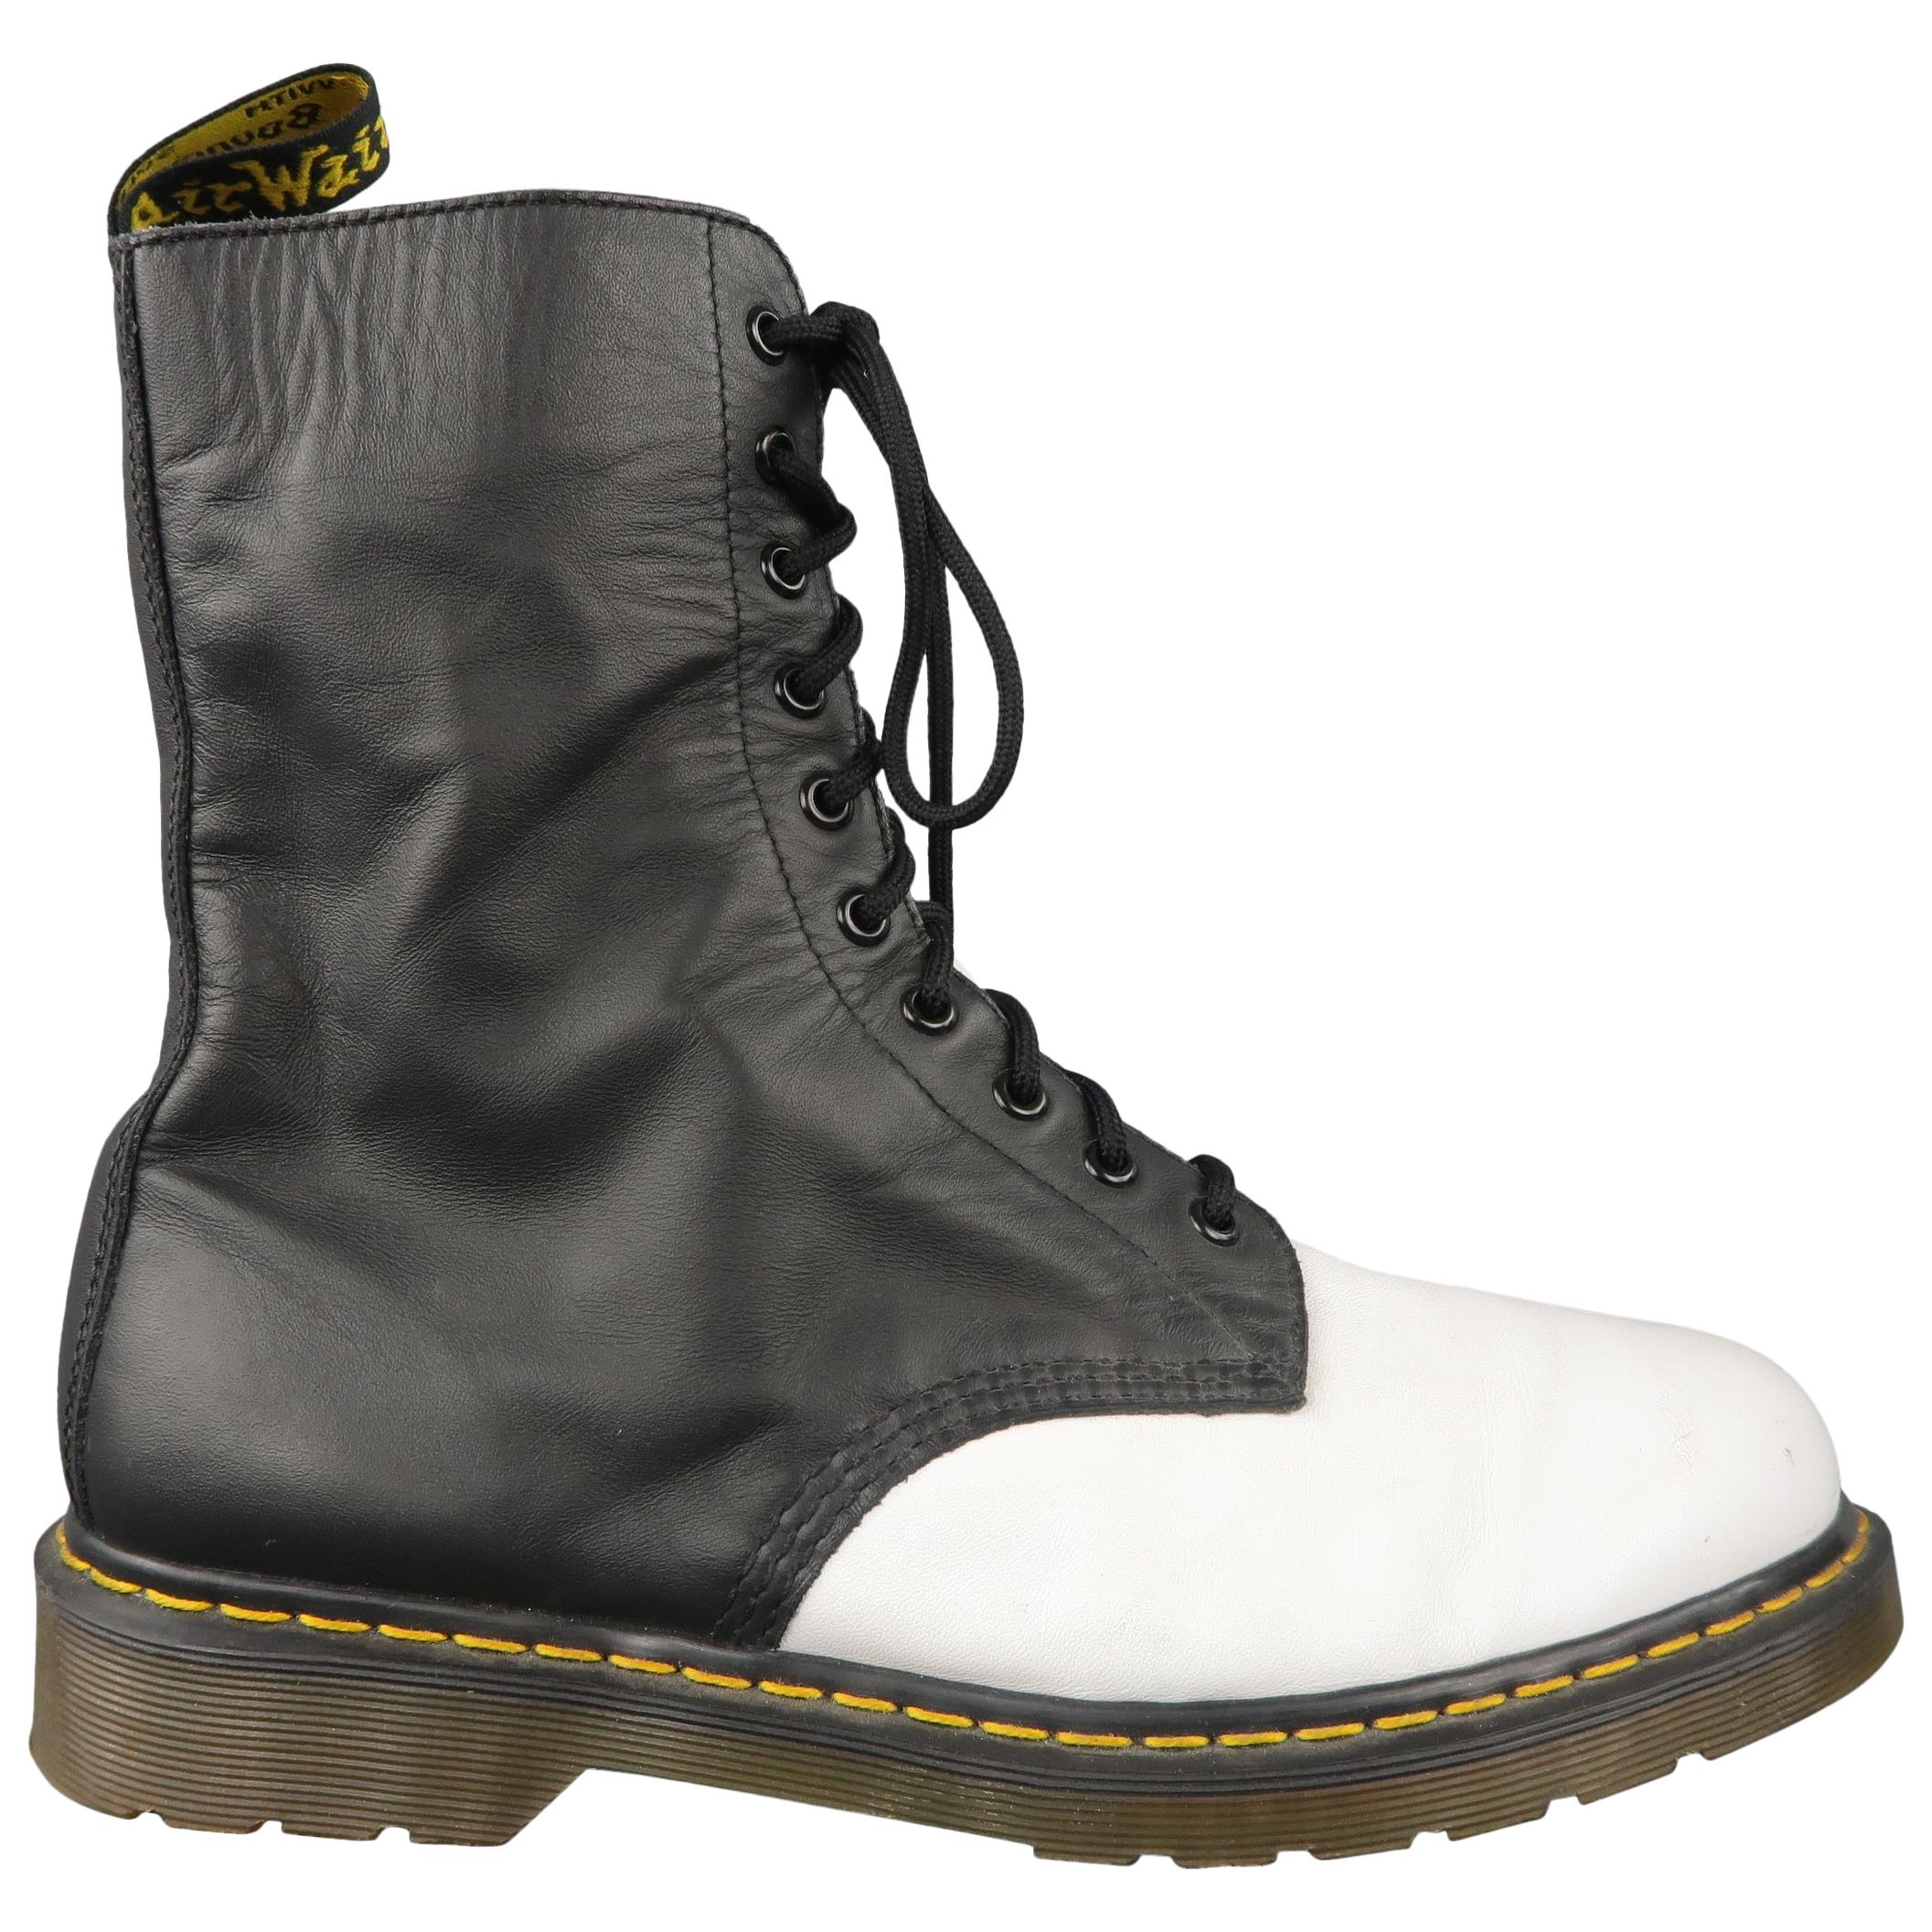 Yohji Yamamoto For Dr. Martens Black and White Two Toned Leather Boots